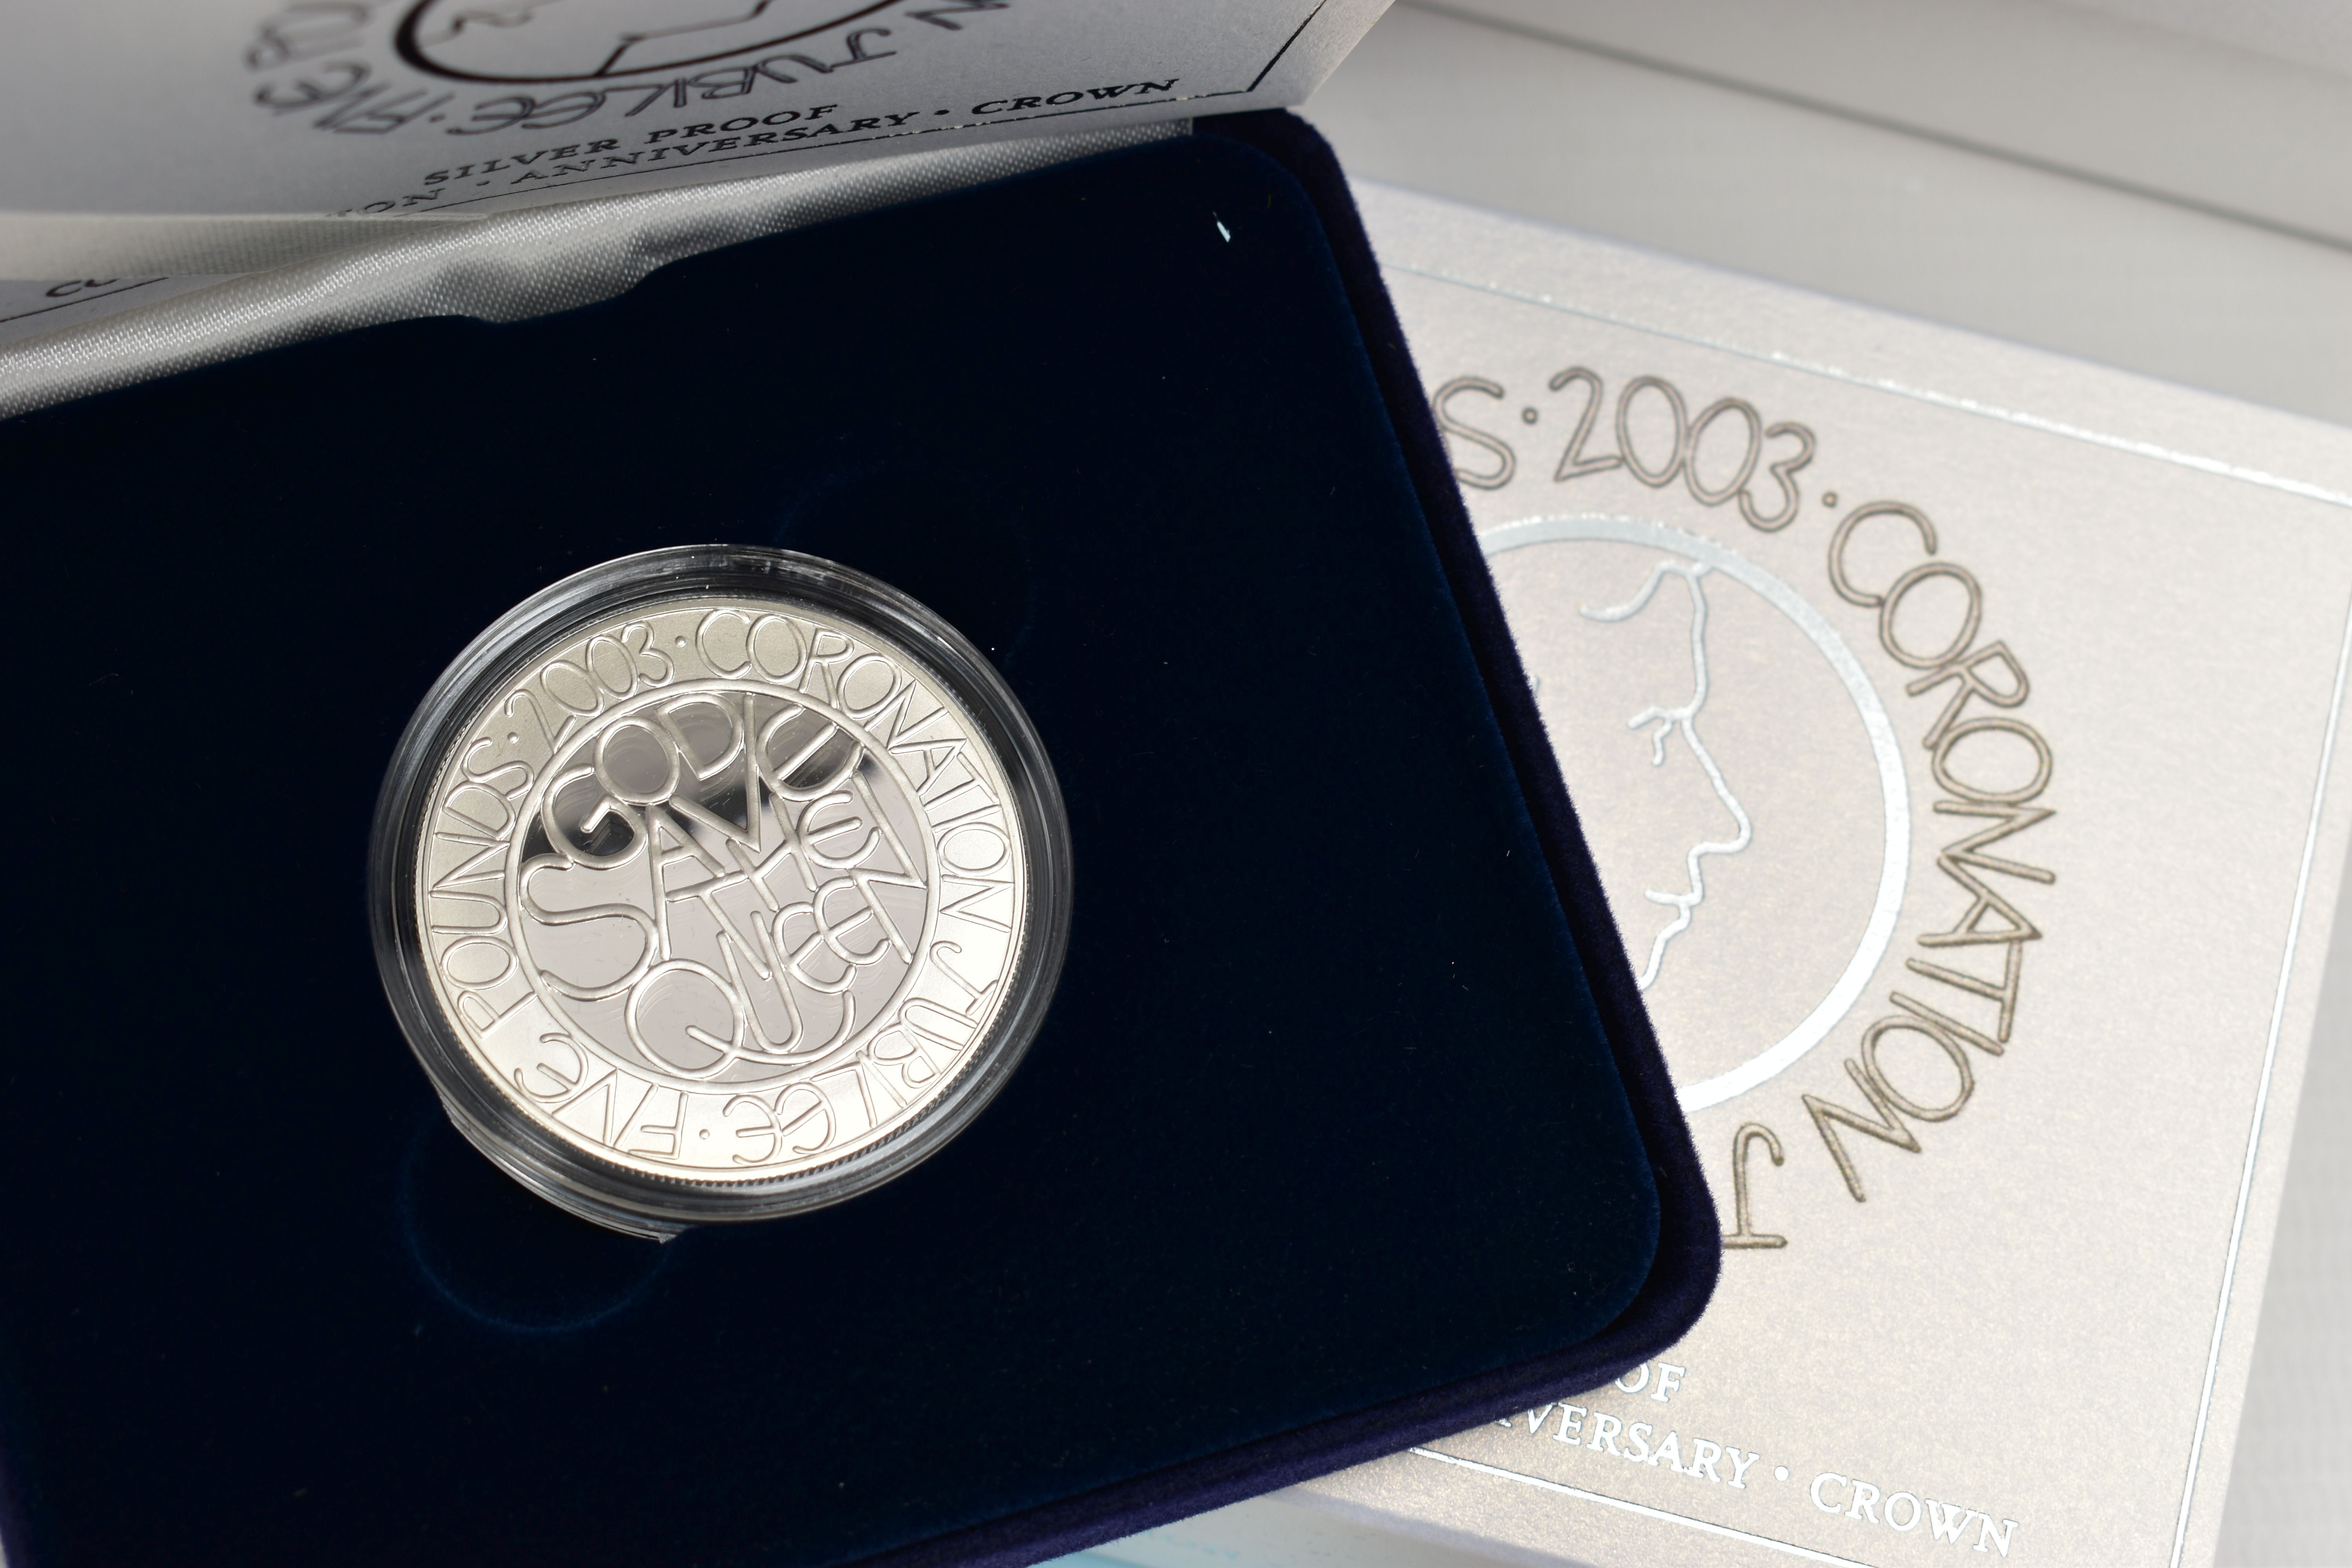 ROYAL MINT ELIZABETH II 2010, 2011, UK SILVER PROOF PIEDFORT COLLECTIONS, 2010 set is a £5 con - Image 3 of 5